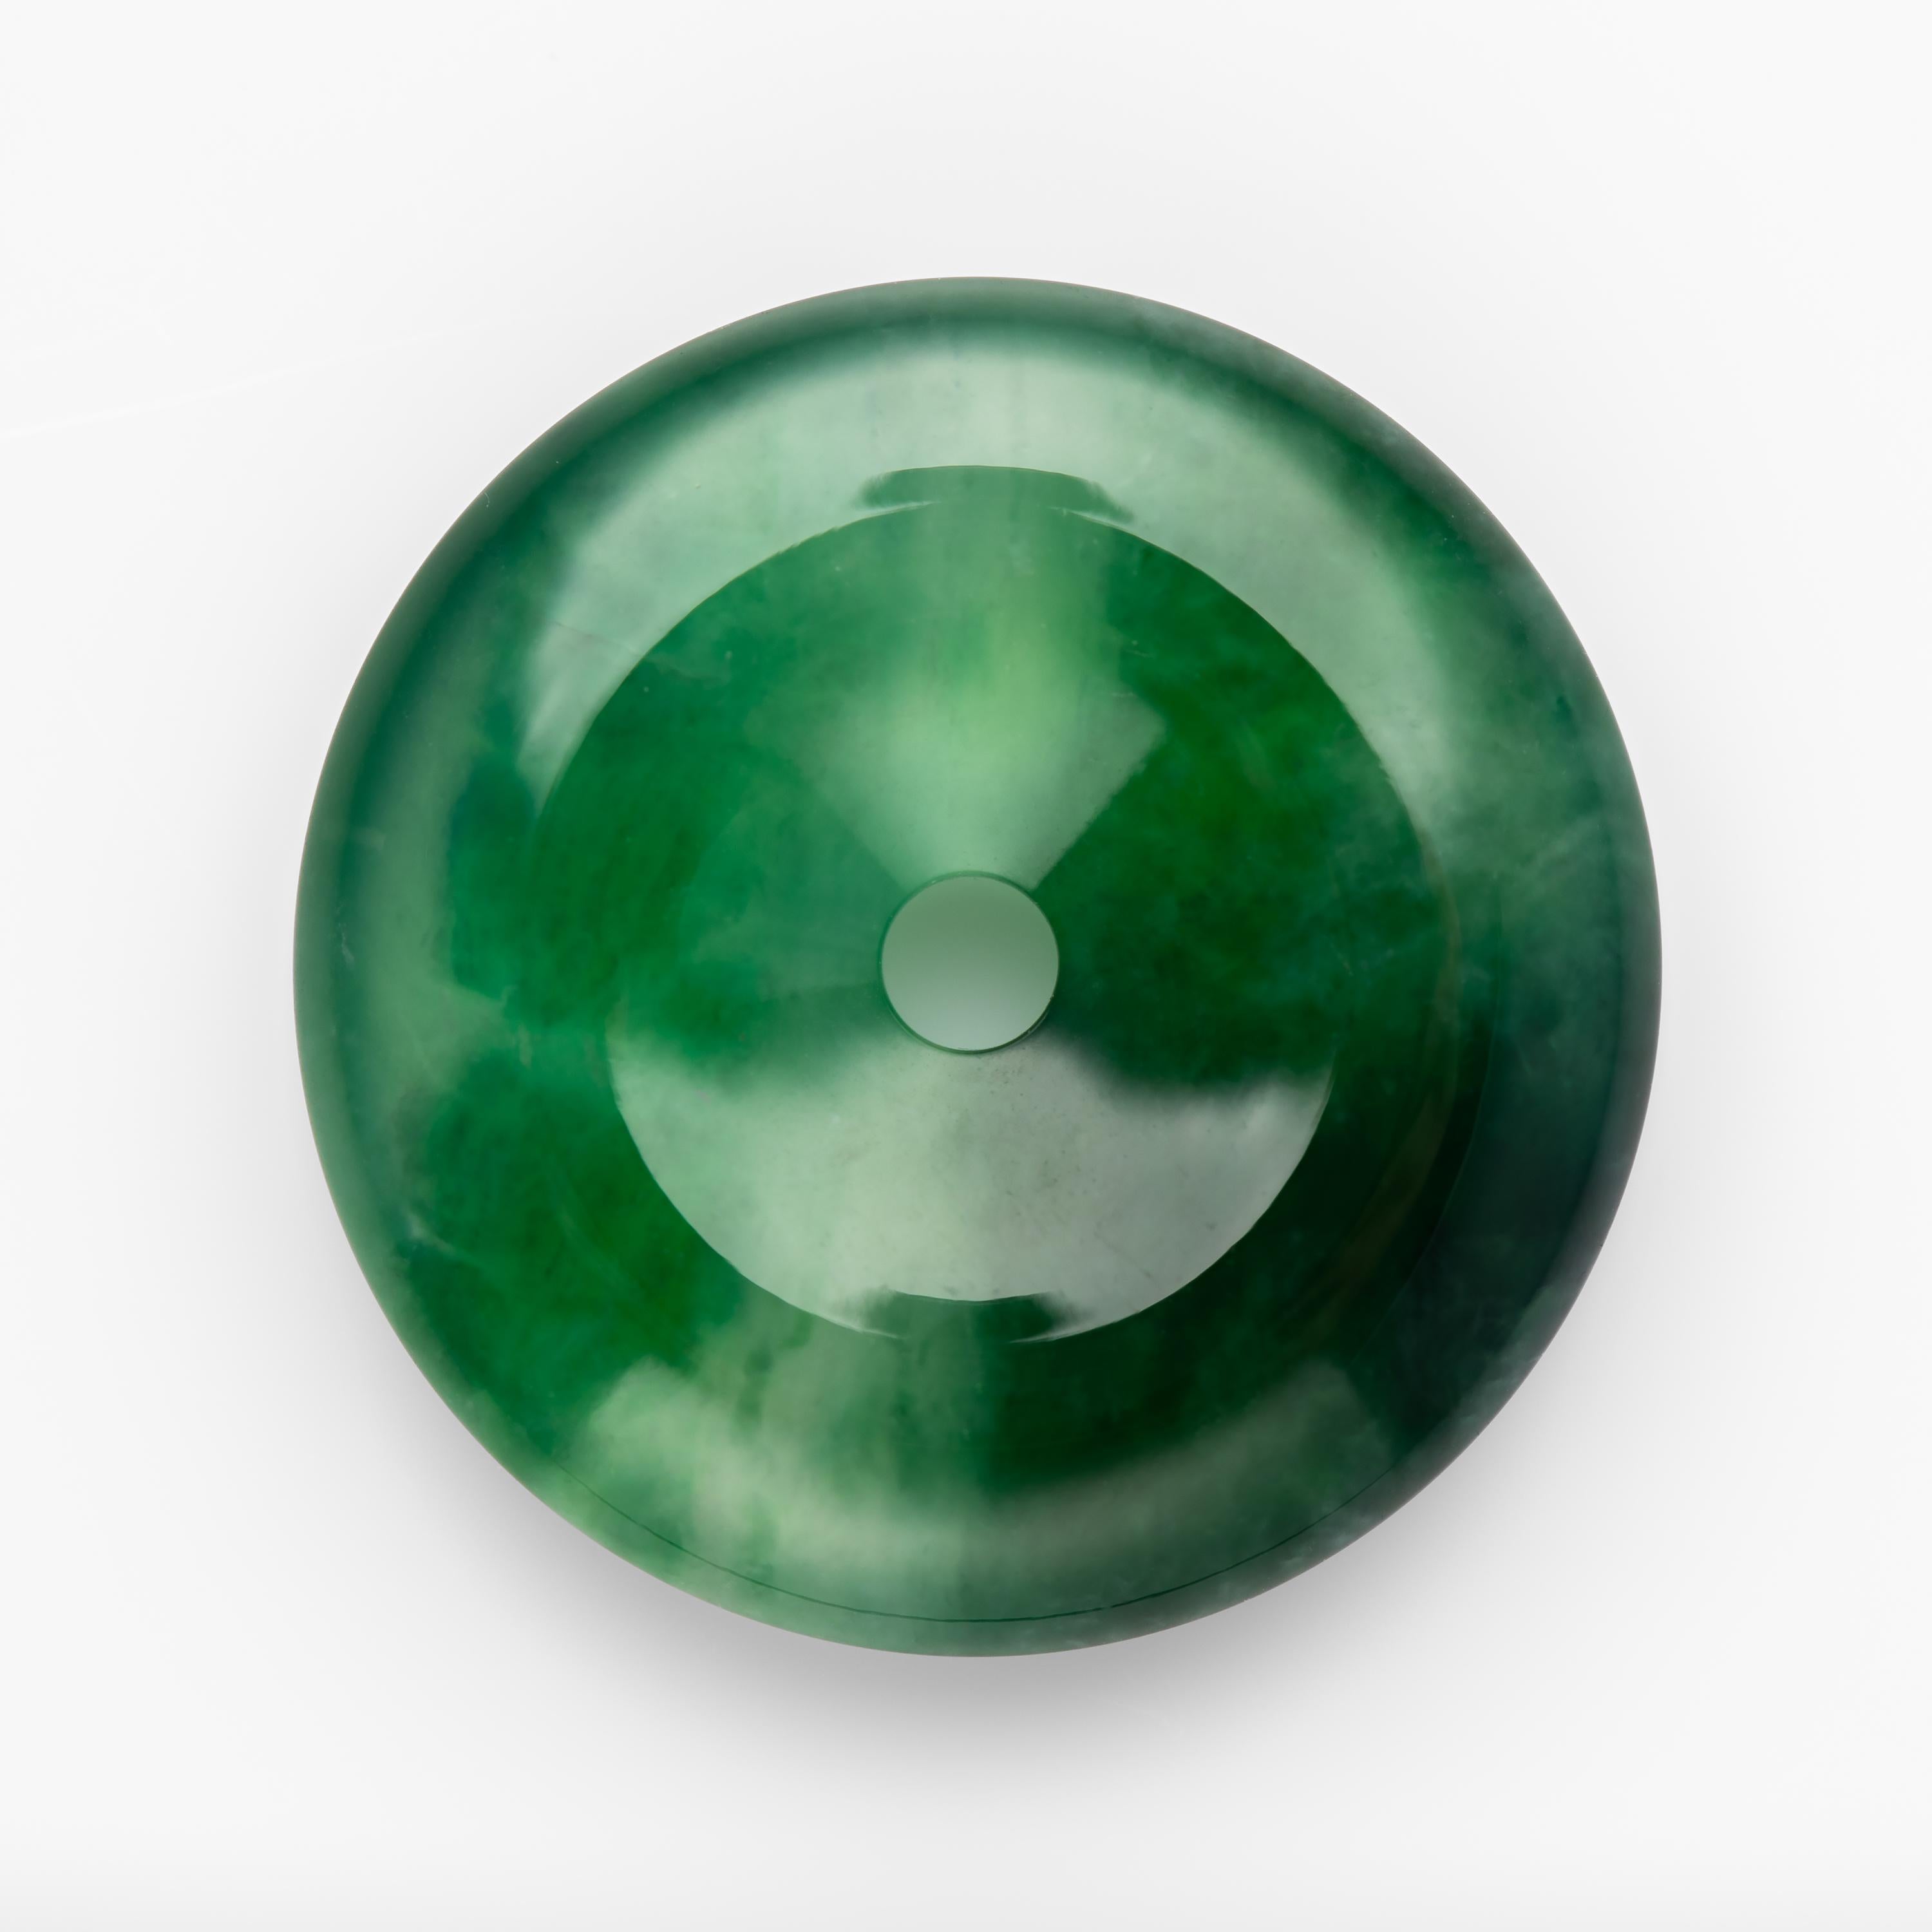 The glassy emerald-green jadeite jade disk you see here is the finest one I have encountered in a very long time. The rich coloring combined with the glassy, watery translucency, and the impossibly delicate mottling that reveals the fine grain of